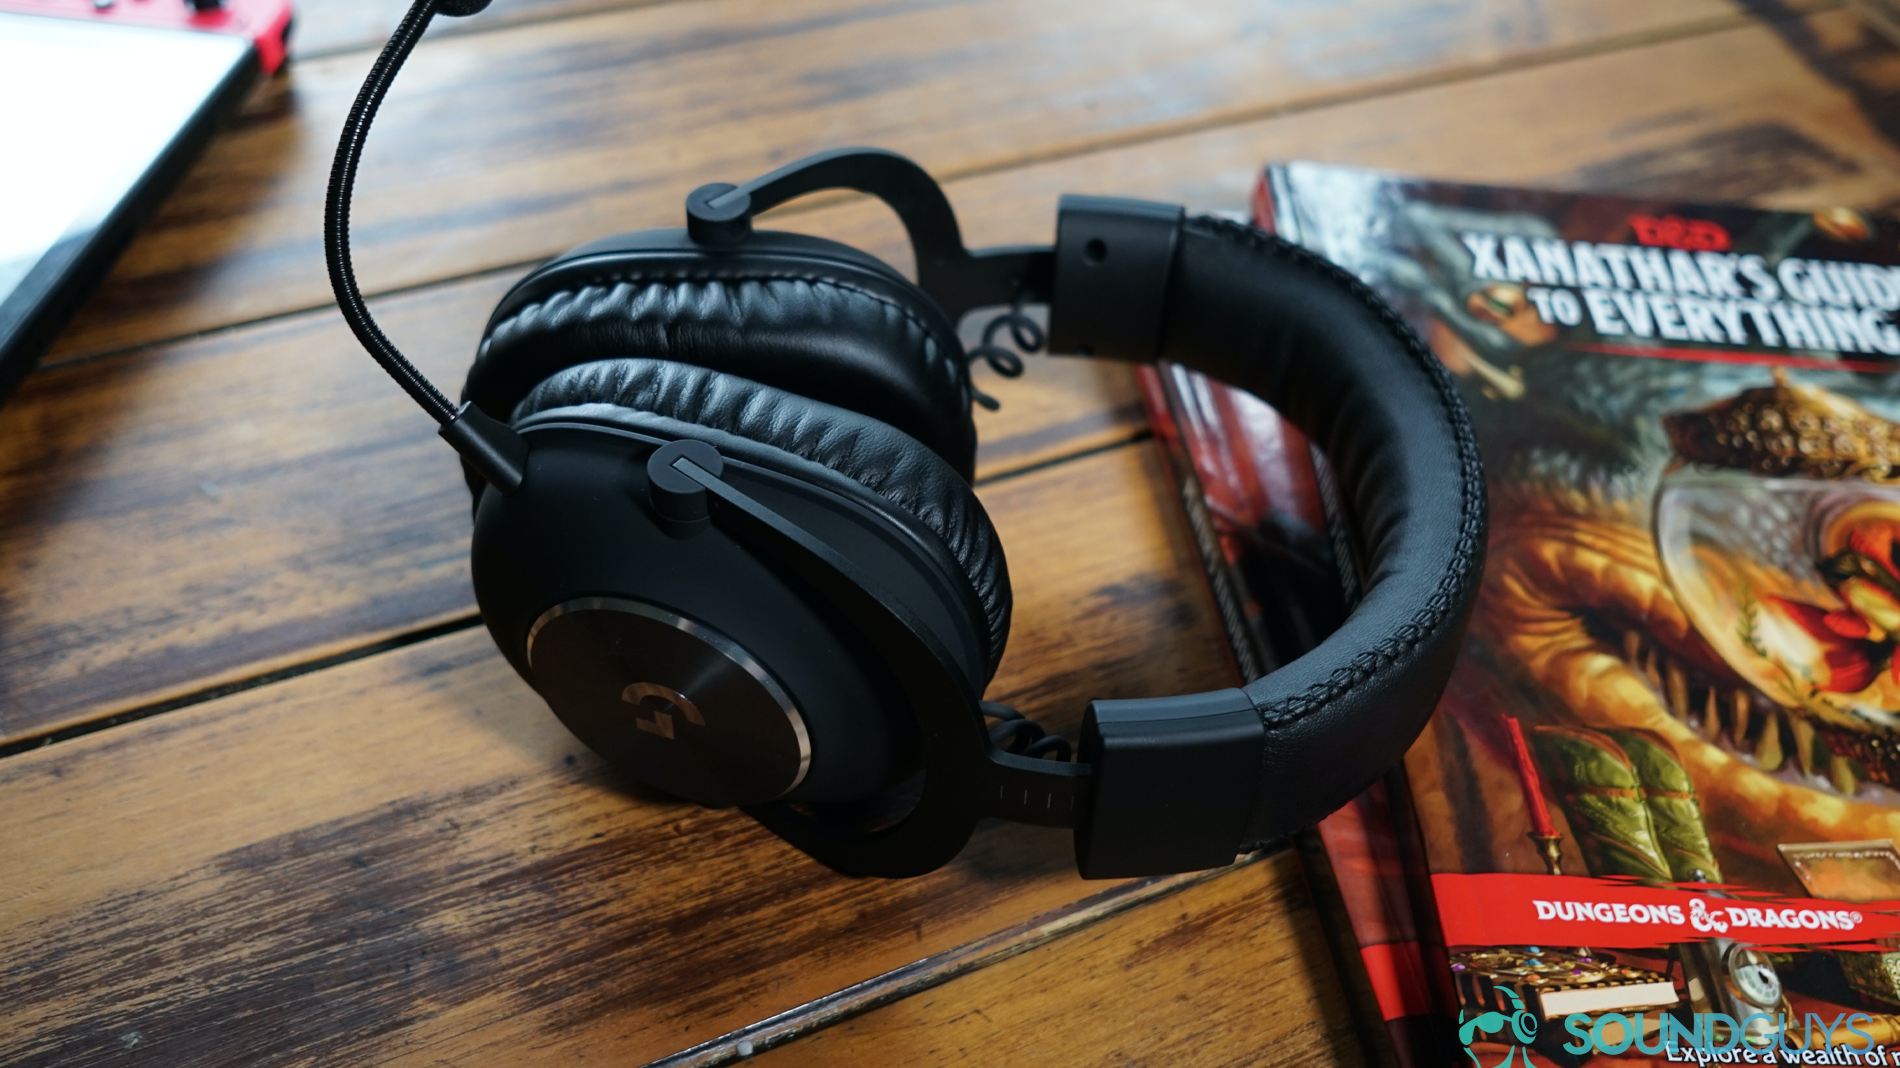 The Logitech G Pro X gaming headset leans on copies of Xanathar's Guide to Everything and the Dungeons and Dragons Players Handbook, with a Nintendo Switch in the background.